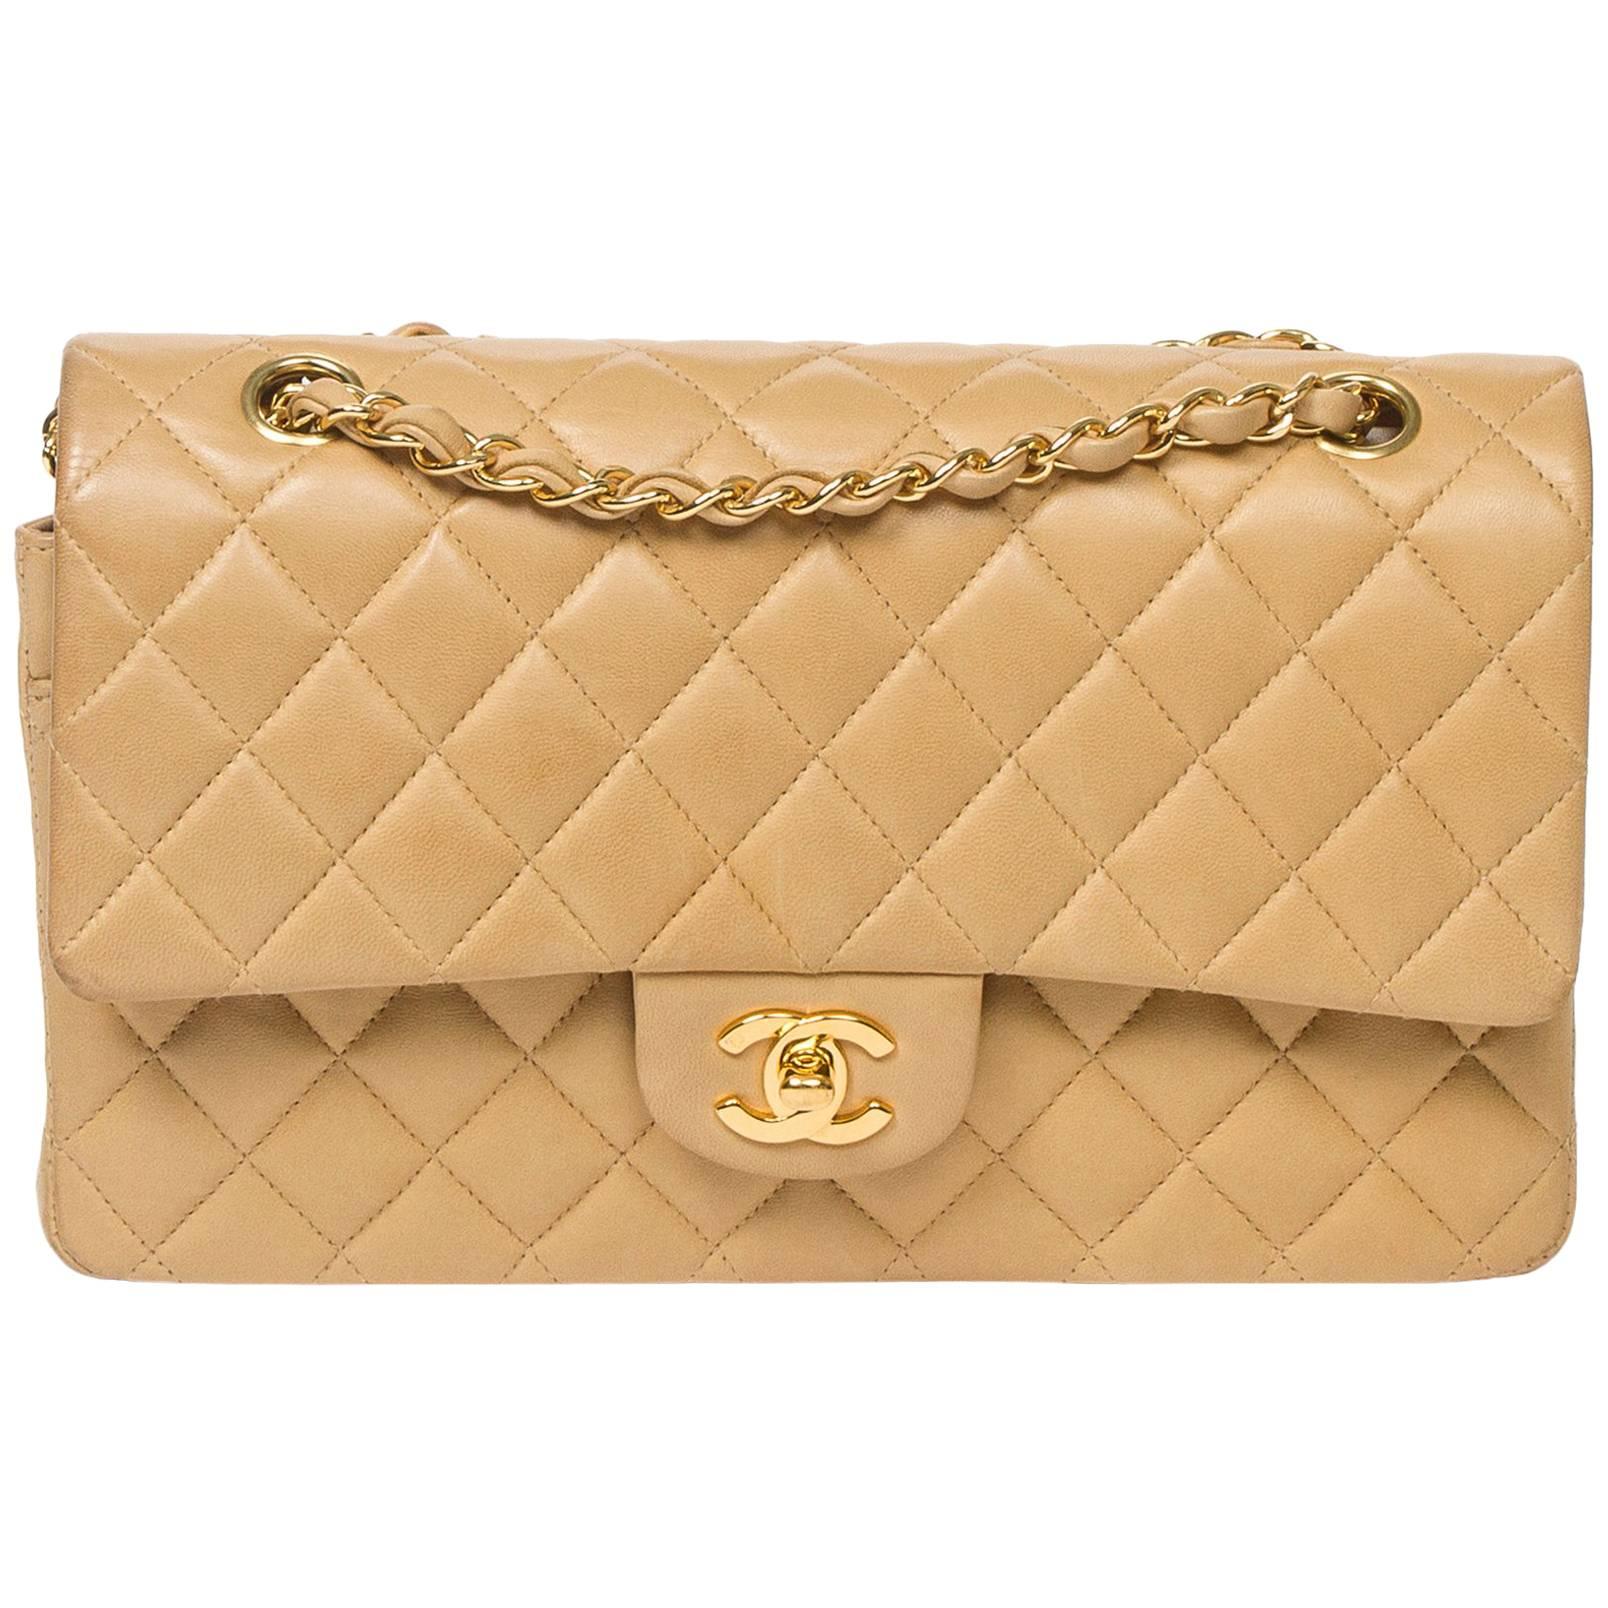 Shoulder bag Chanel Classic Double Flap in beige leather